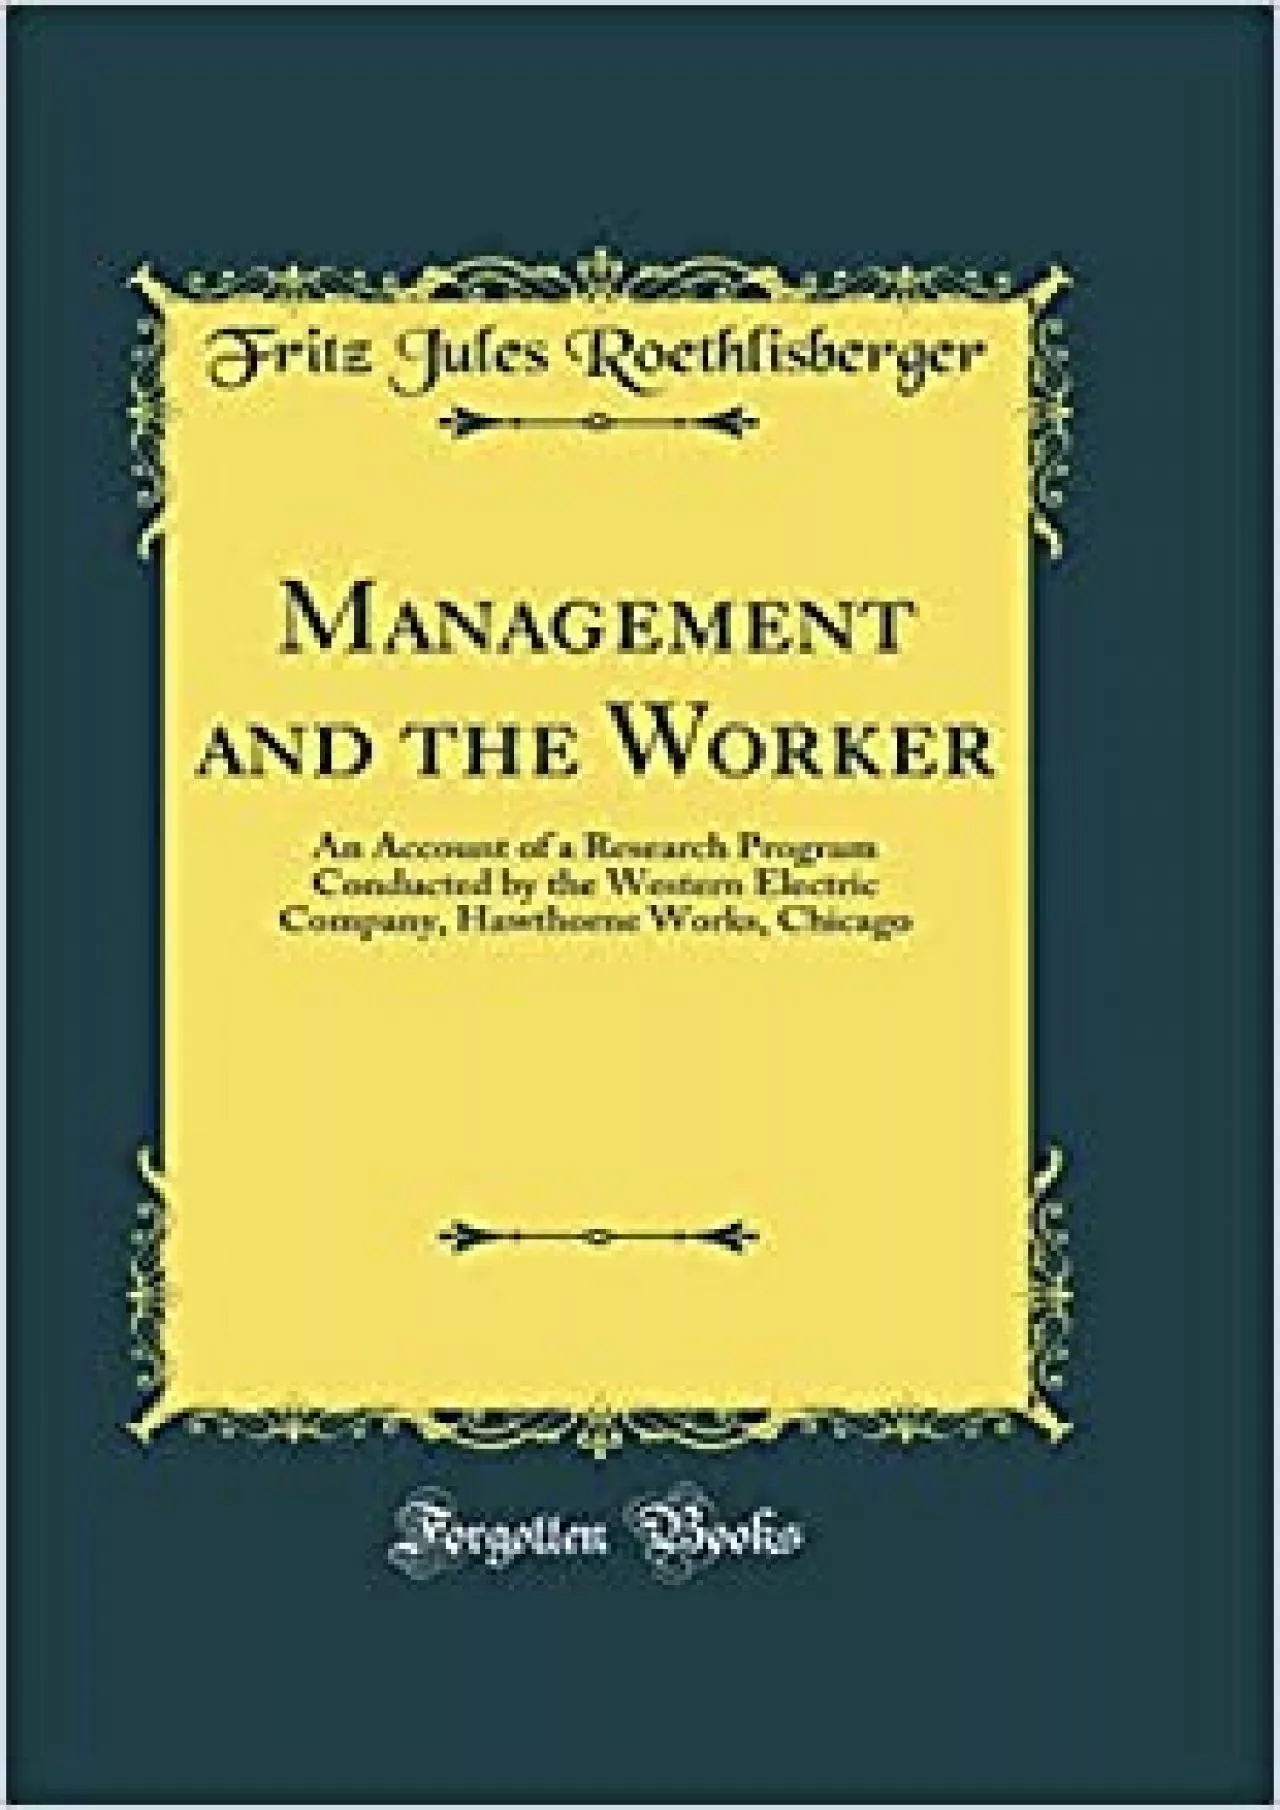 Management and the Worker: An Account of a Research Program Conducted by the Western Electric